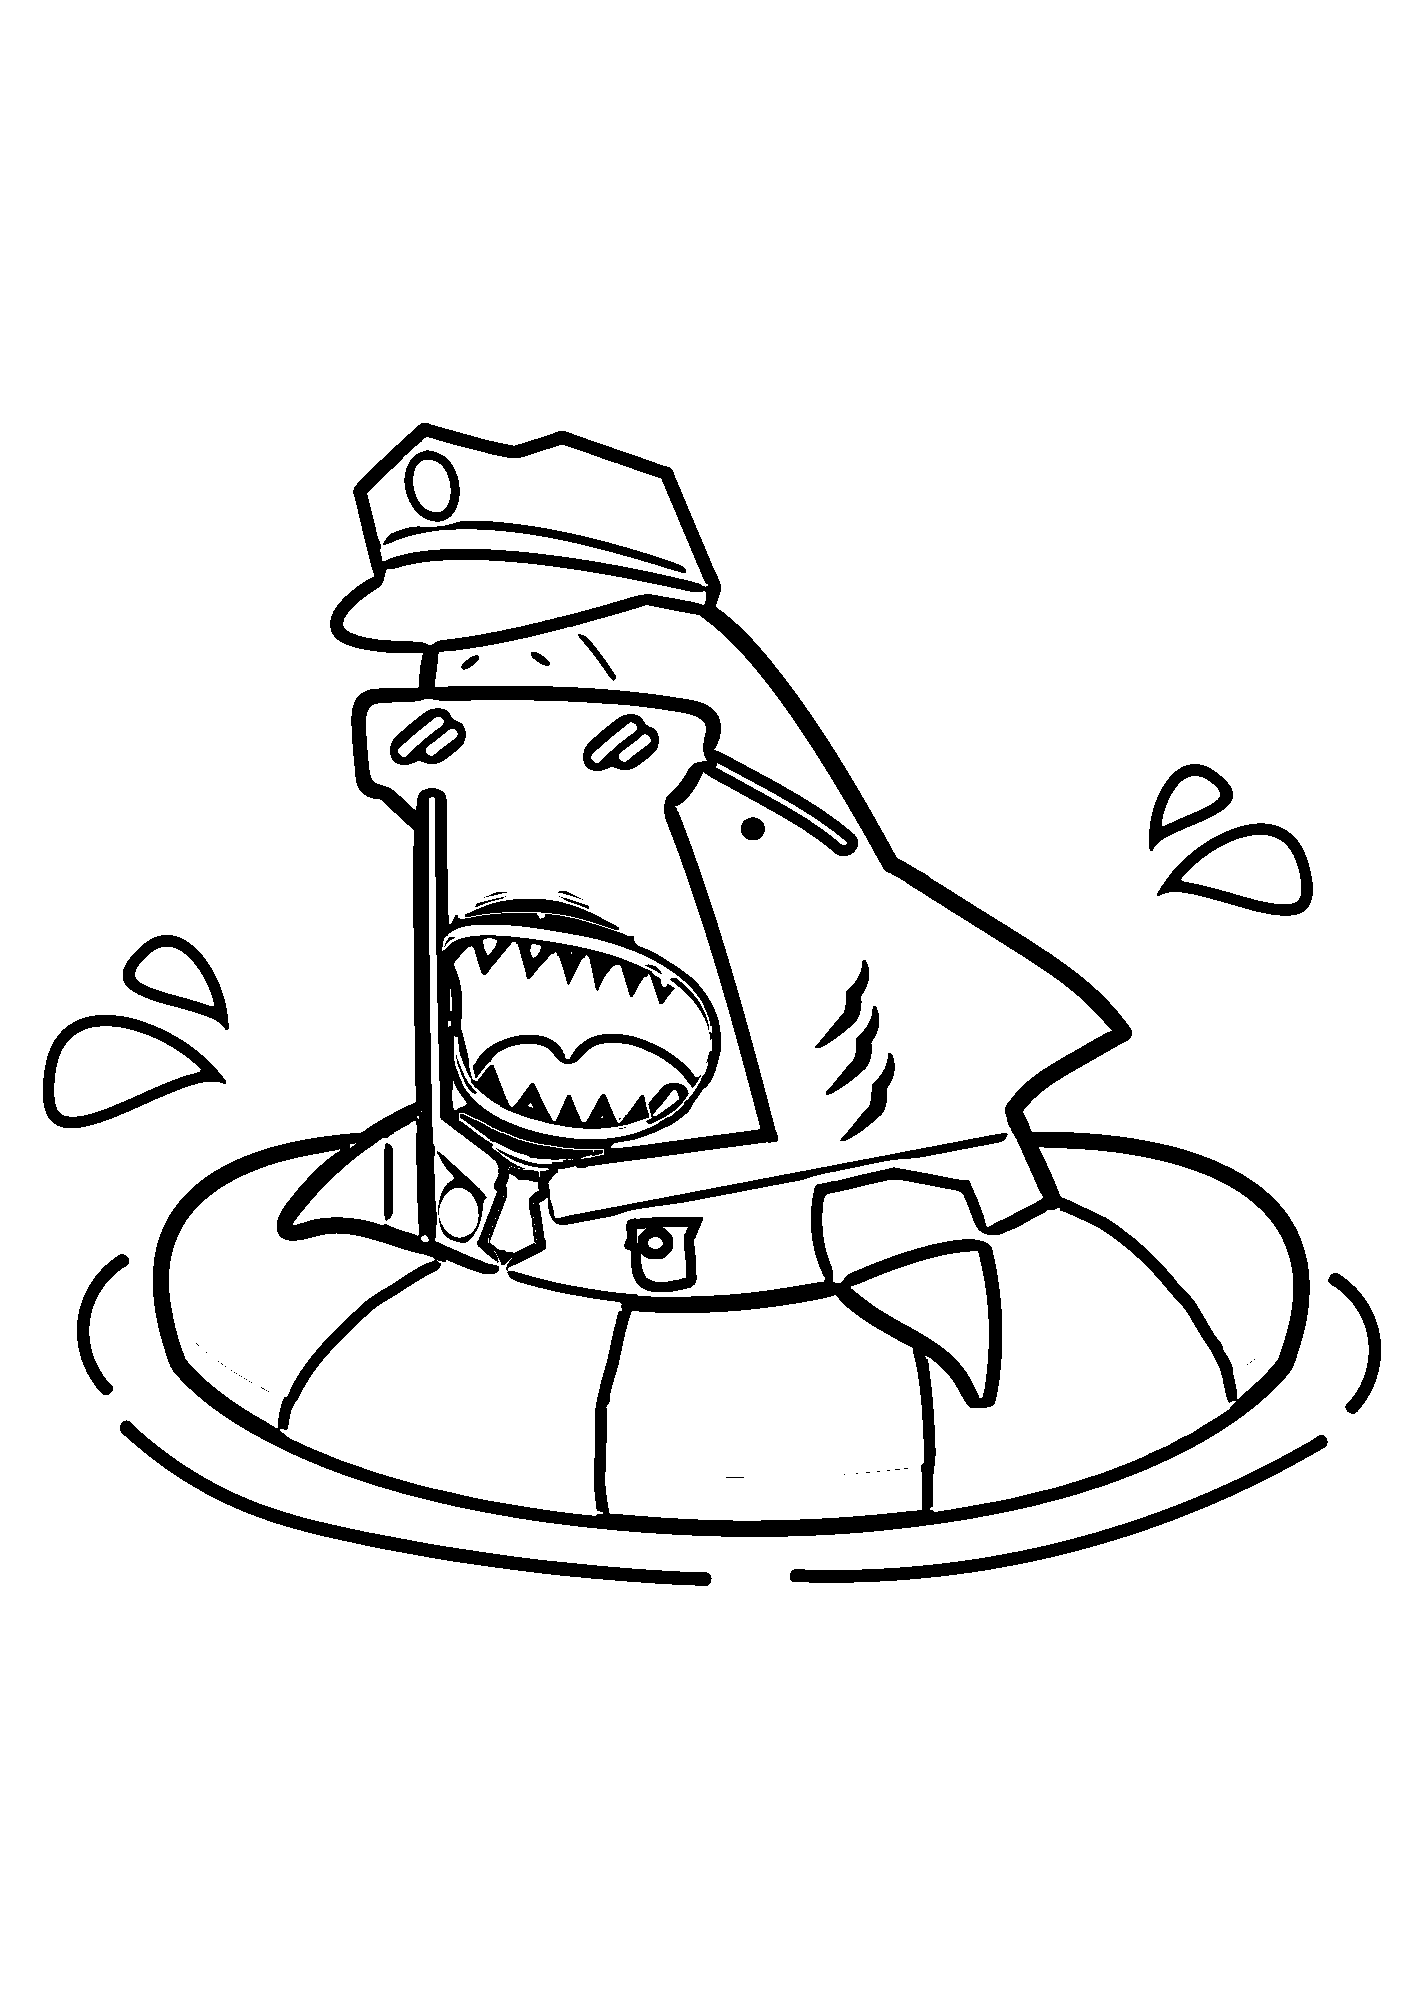 Cute Shark Police Ring Coloring Page